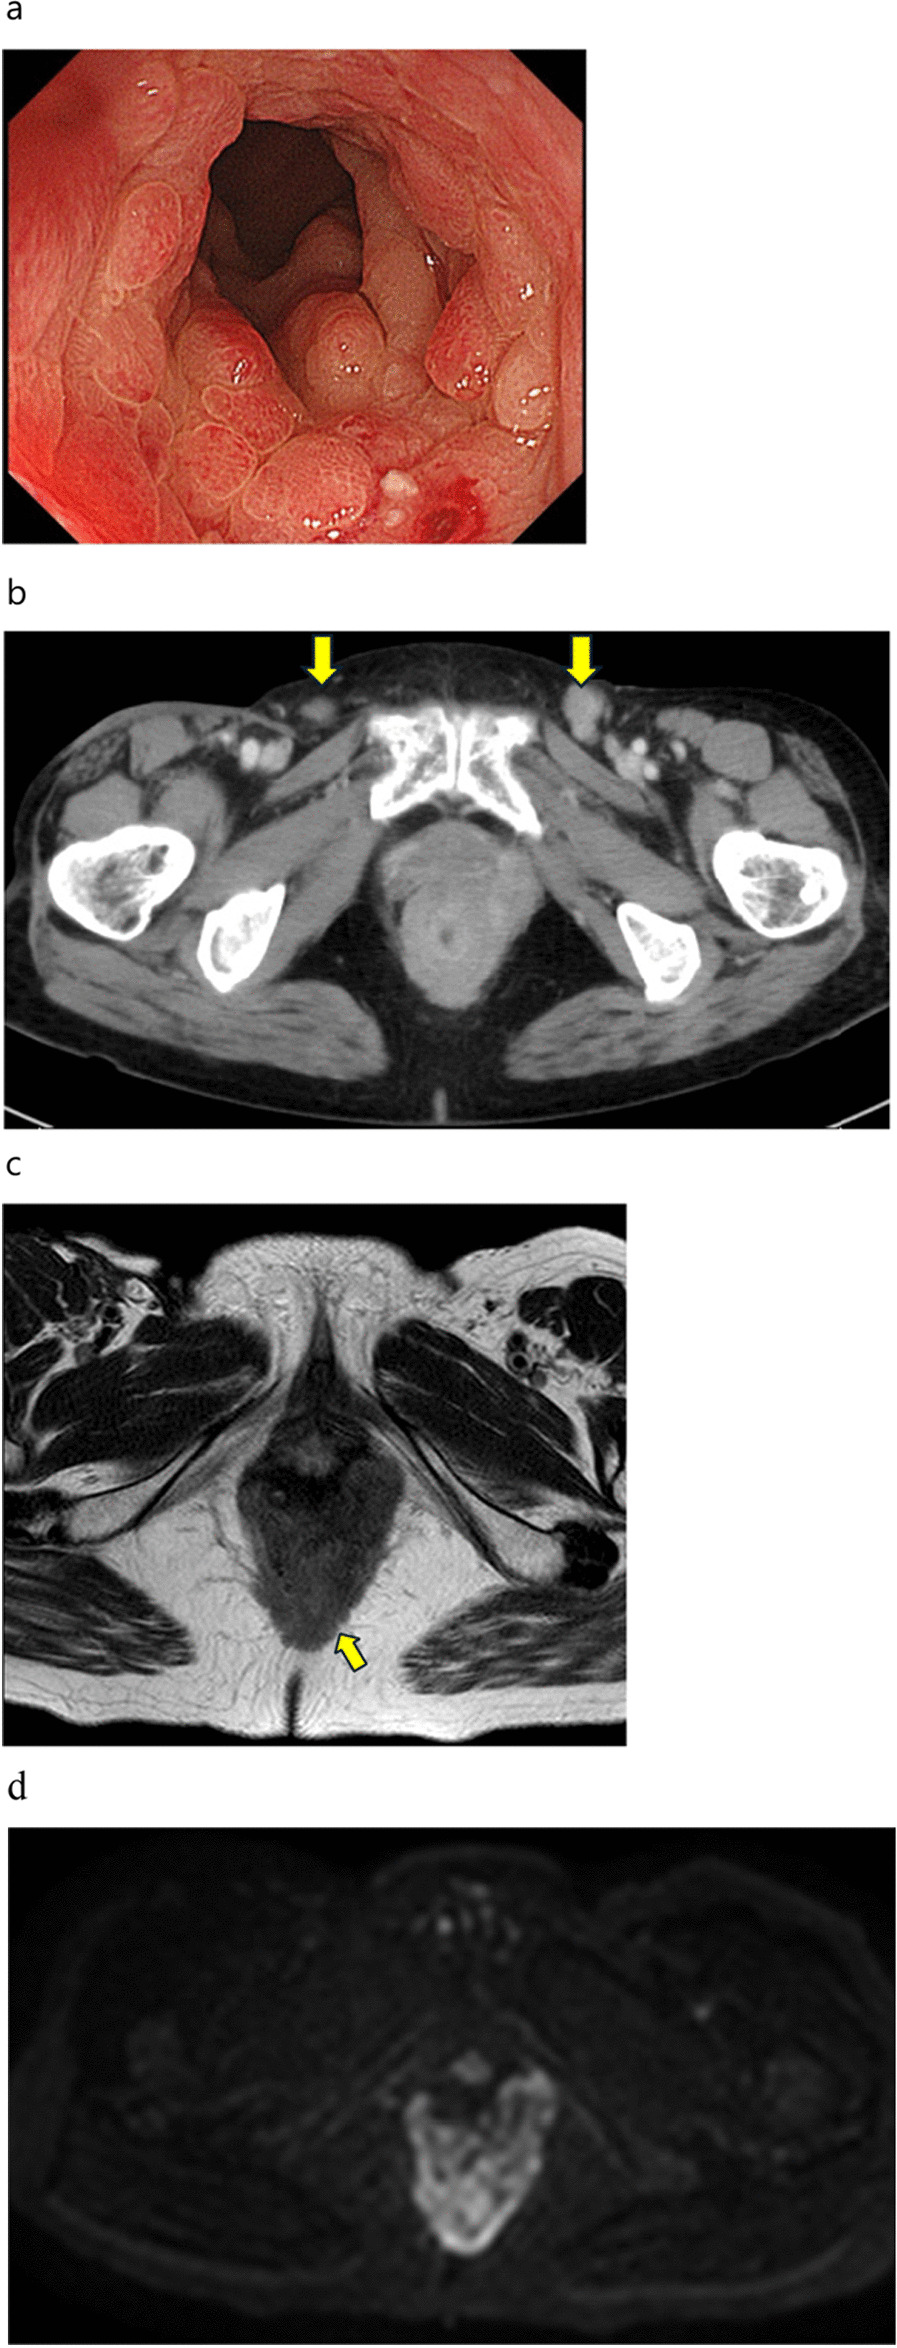 Squamous cell carcinoma of the anus successfully treated with multidisciplinary therapy for metachronous metastatic and local recurrences after DCF chemotherapy: a case report